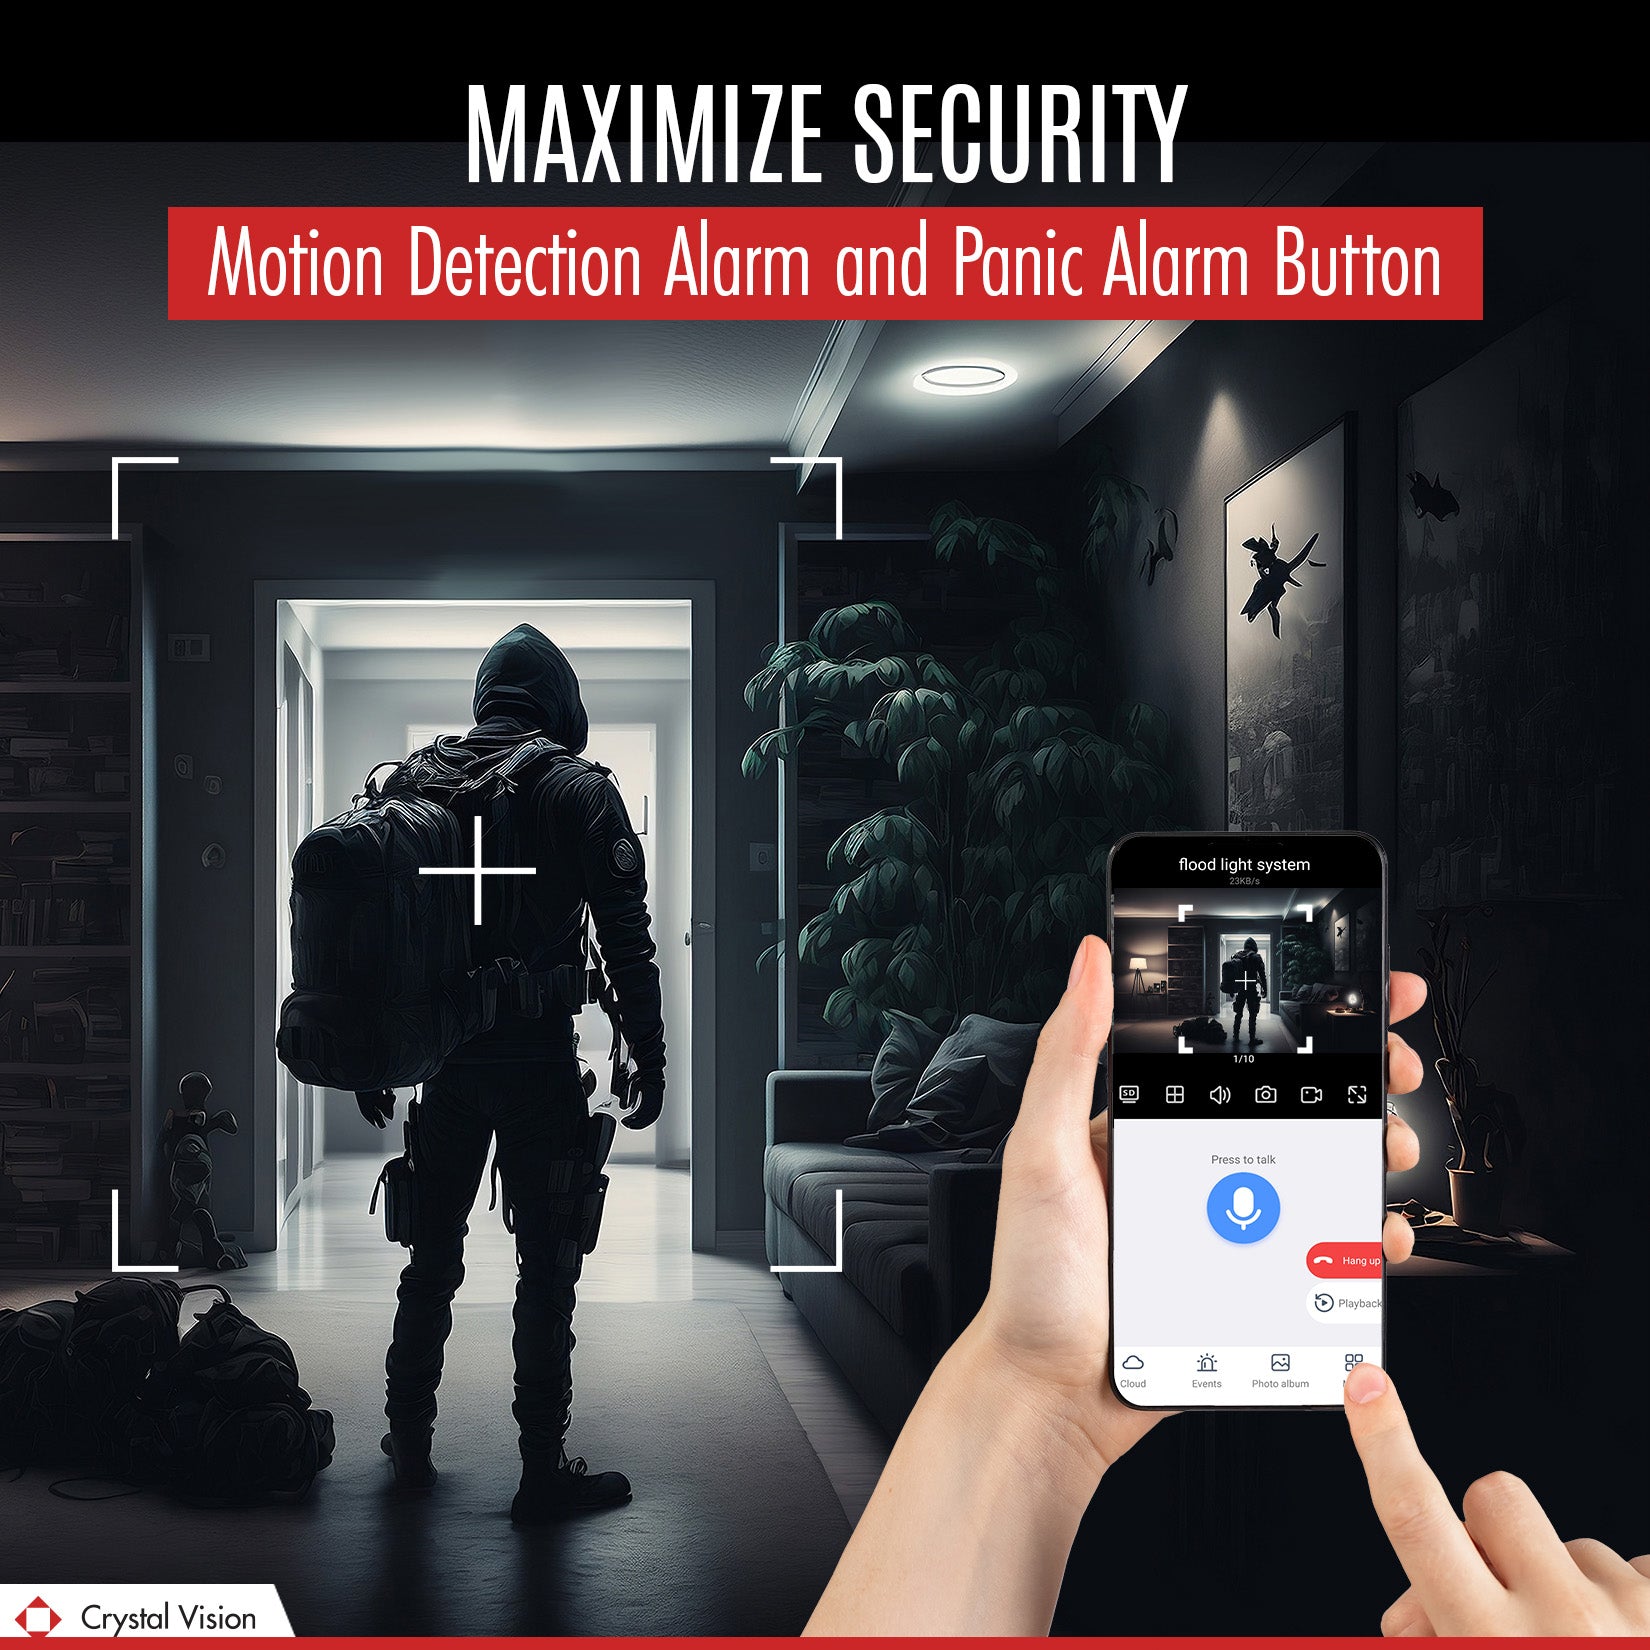 Promotional image for Crystal Vision highlighting _MAXIMIZE SECURITY_ with features like Motion Detection Alarm and Panic Alarm Button, depicting a person monitoring a burglar on eseecloud app